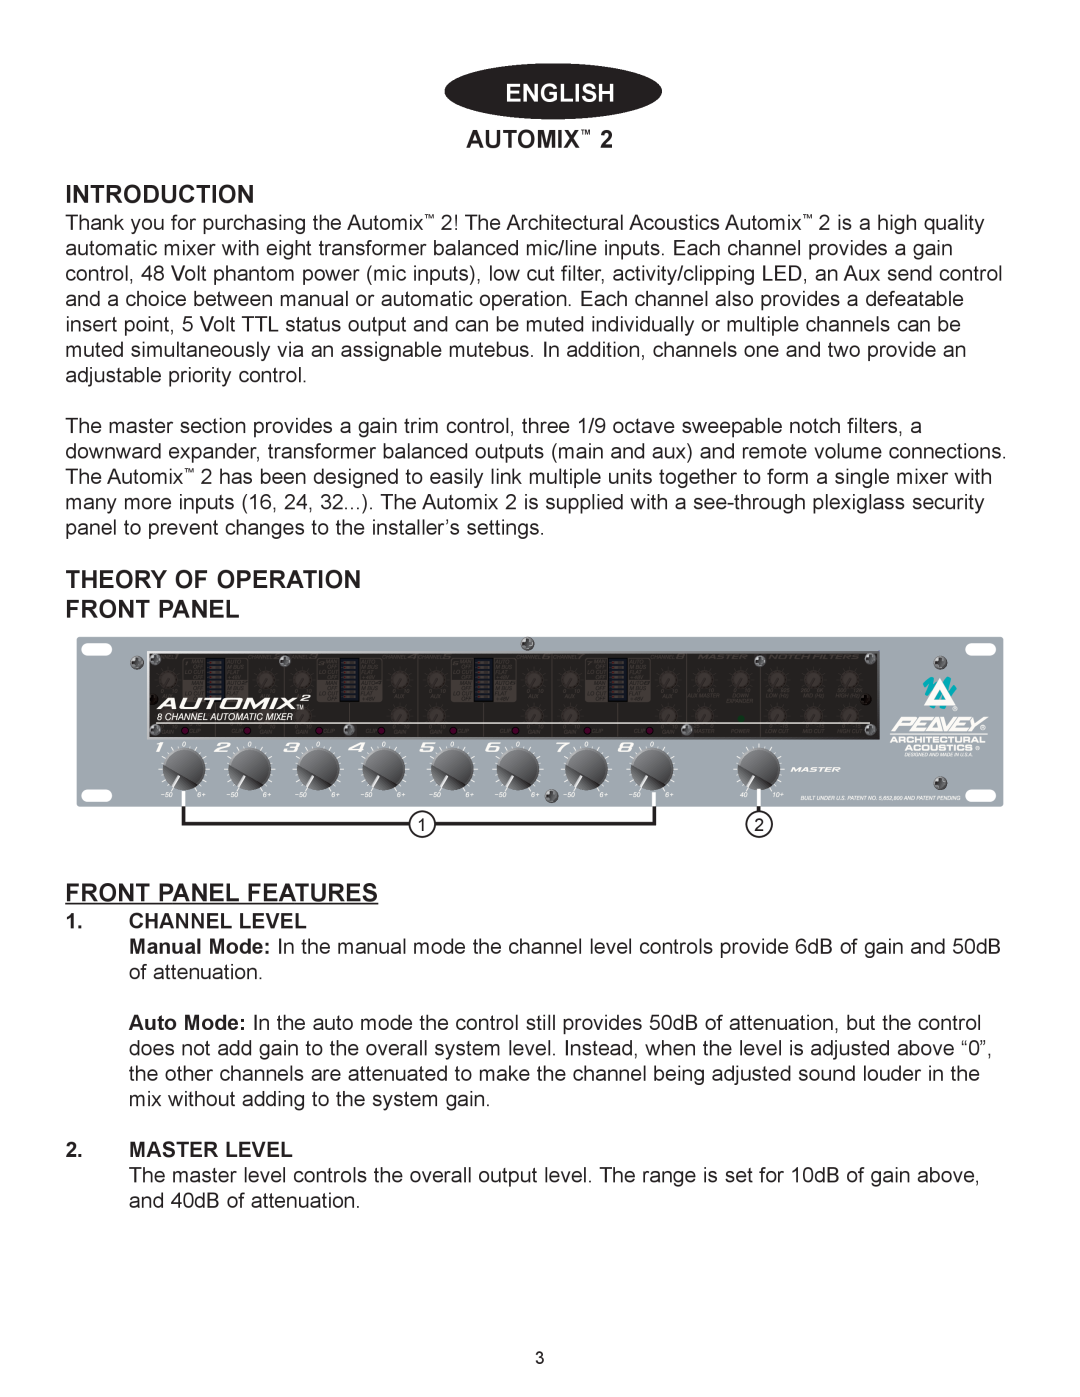 Peavey Automix2 manual English, Automixª Introduction, Theory Of Operation Front Panel, Front Panel Features, Channel Level 